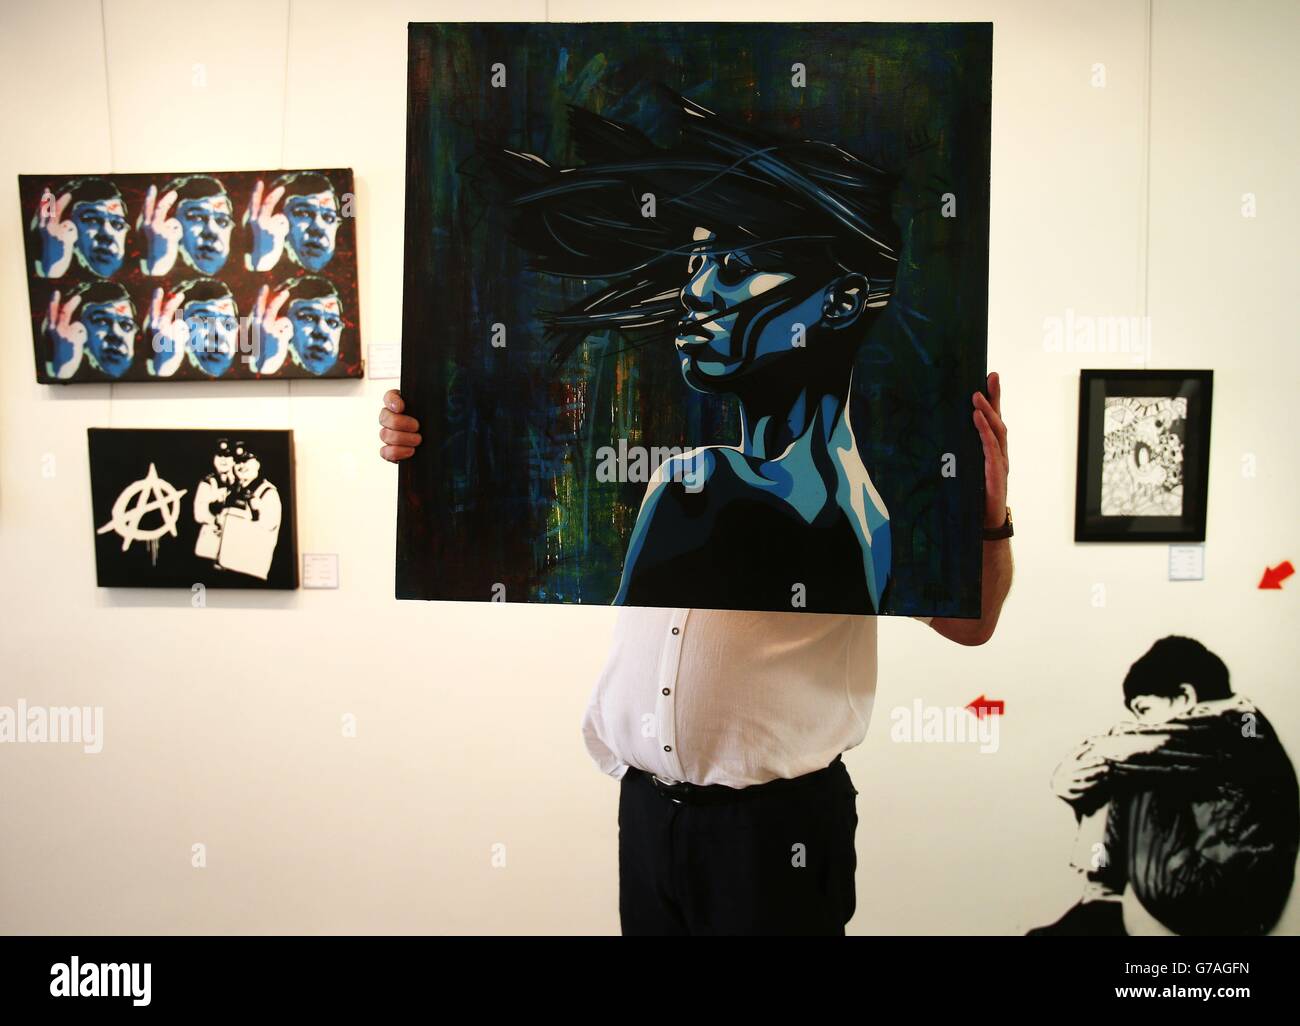 Gallery owner Vincent Kelly displays 'Sultry' by Iljin as part of an exhibition of street art and graffiti entitled 'Street Life' which takes place at Zozimus Gallery on Francis Street, Dublin. Stock Photo